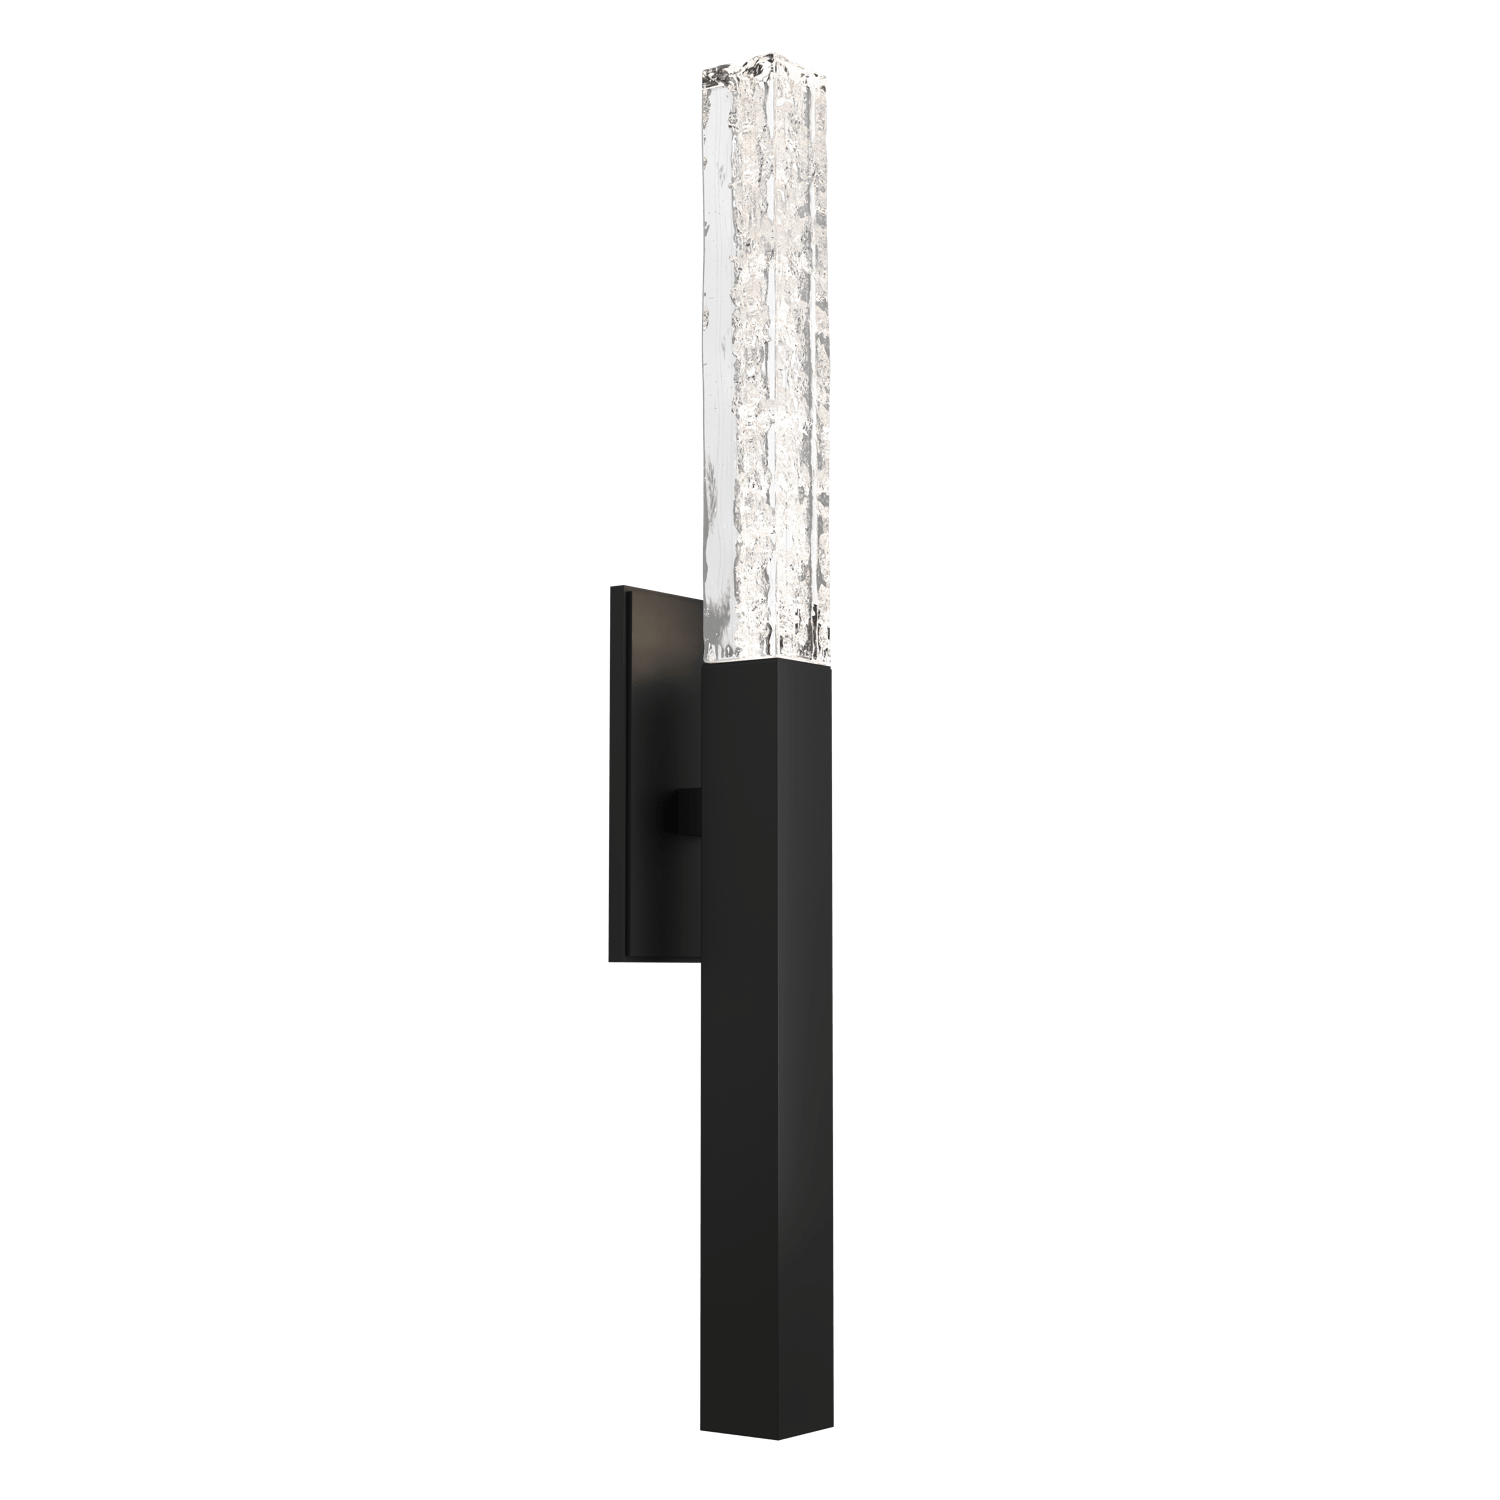 IDB0060-26-MB-GC-Hammerton-Studio-Axis-Indoor-Sconce-with-Matte-Black-finish-and-clear-cast-glass-and-LED-lamping